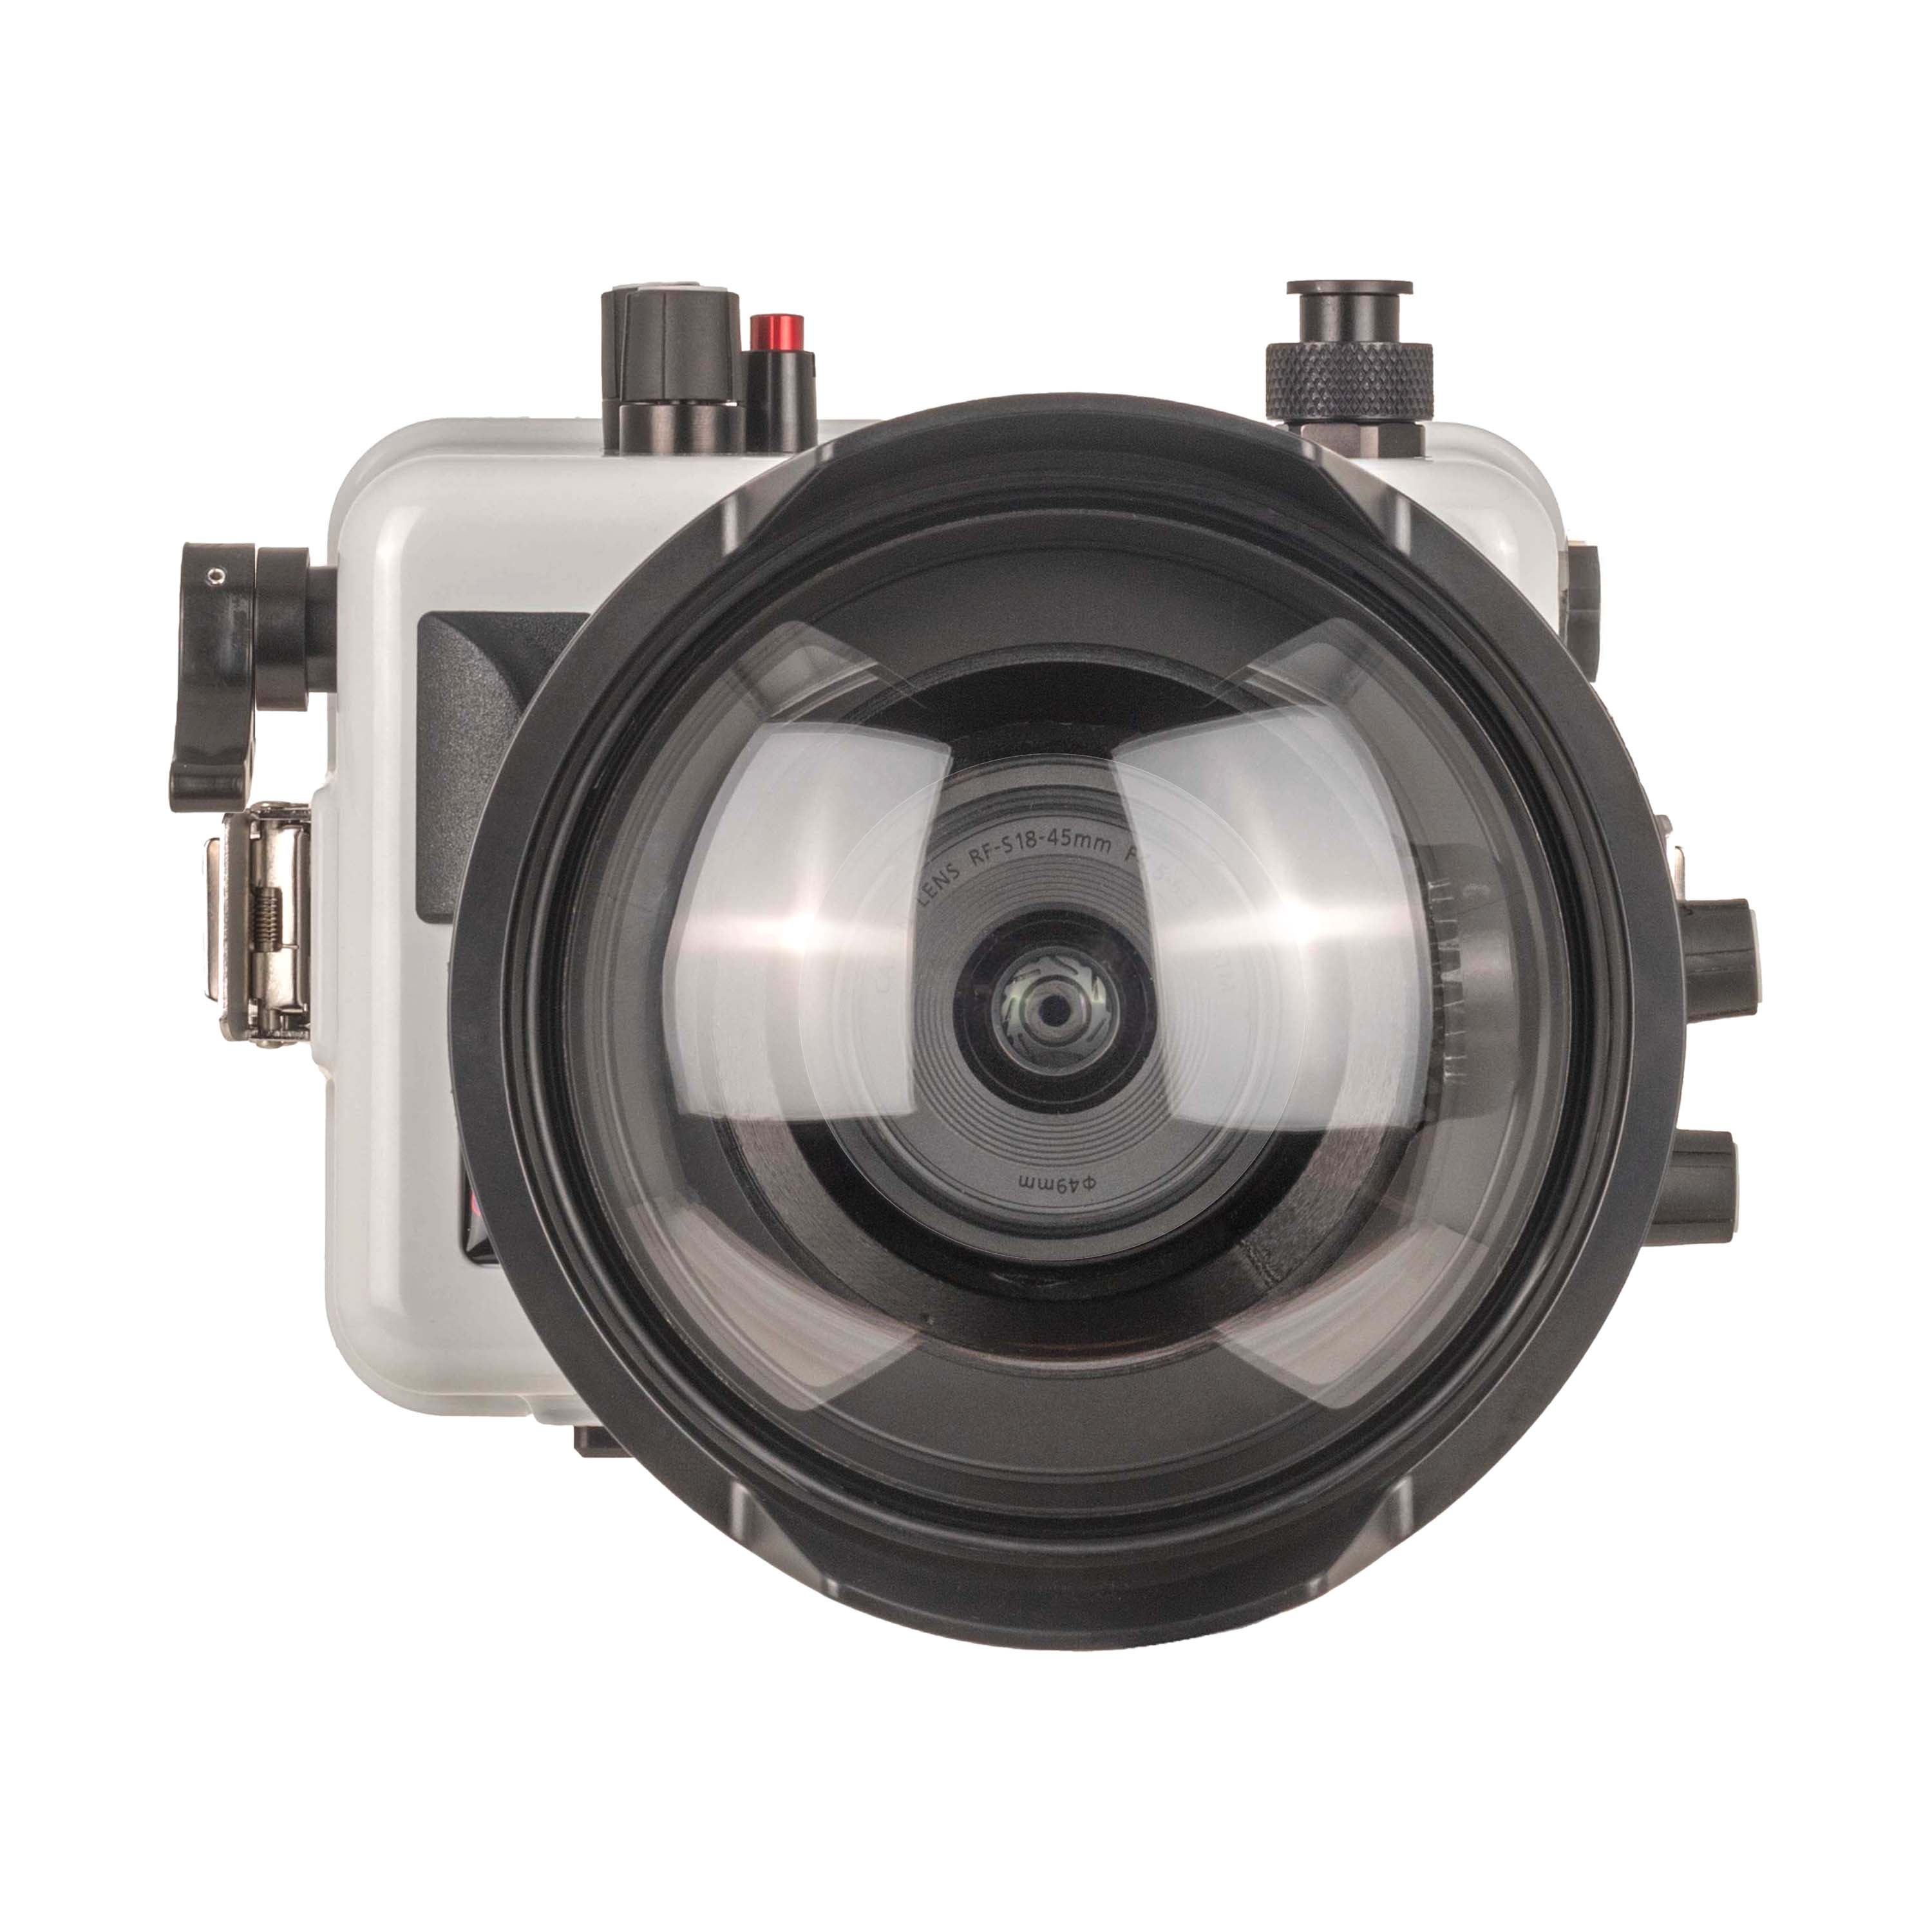 200DLM/D Underwater Housing for Canon EOS R100 with Dome Port